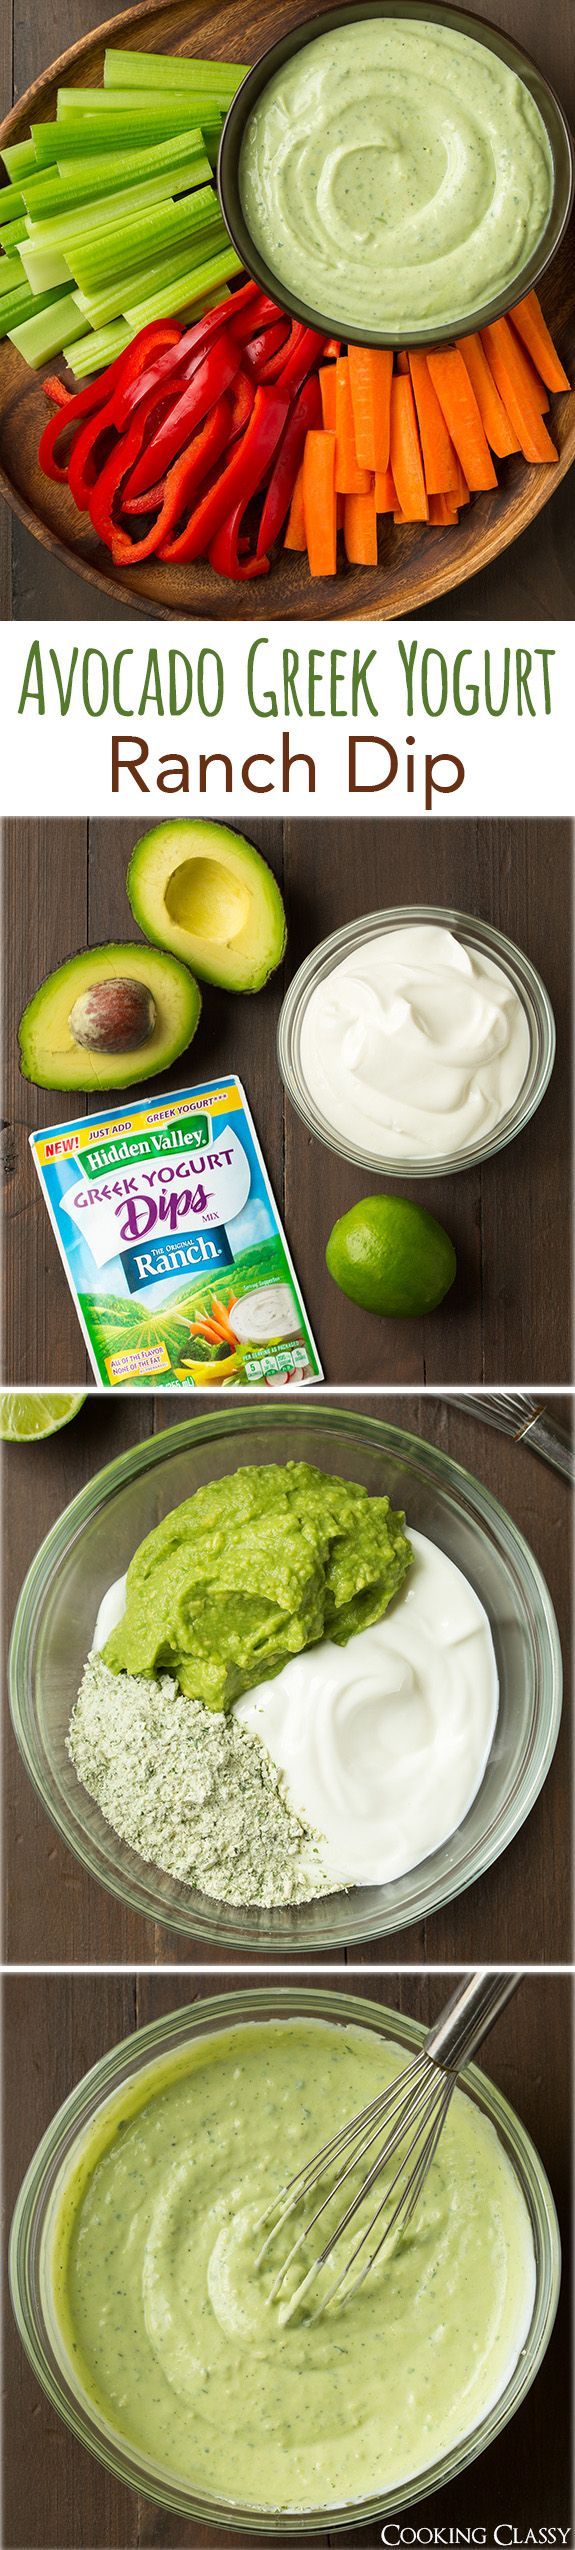 Avocado Greek Yogurt Ranch Dip –  only 4 ingredients and a breeze to make! So delicious, even my kids loved it! It’s so good as a